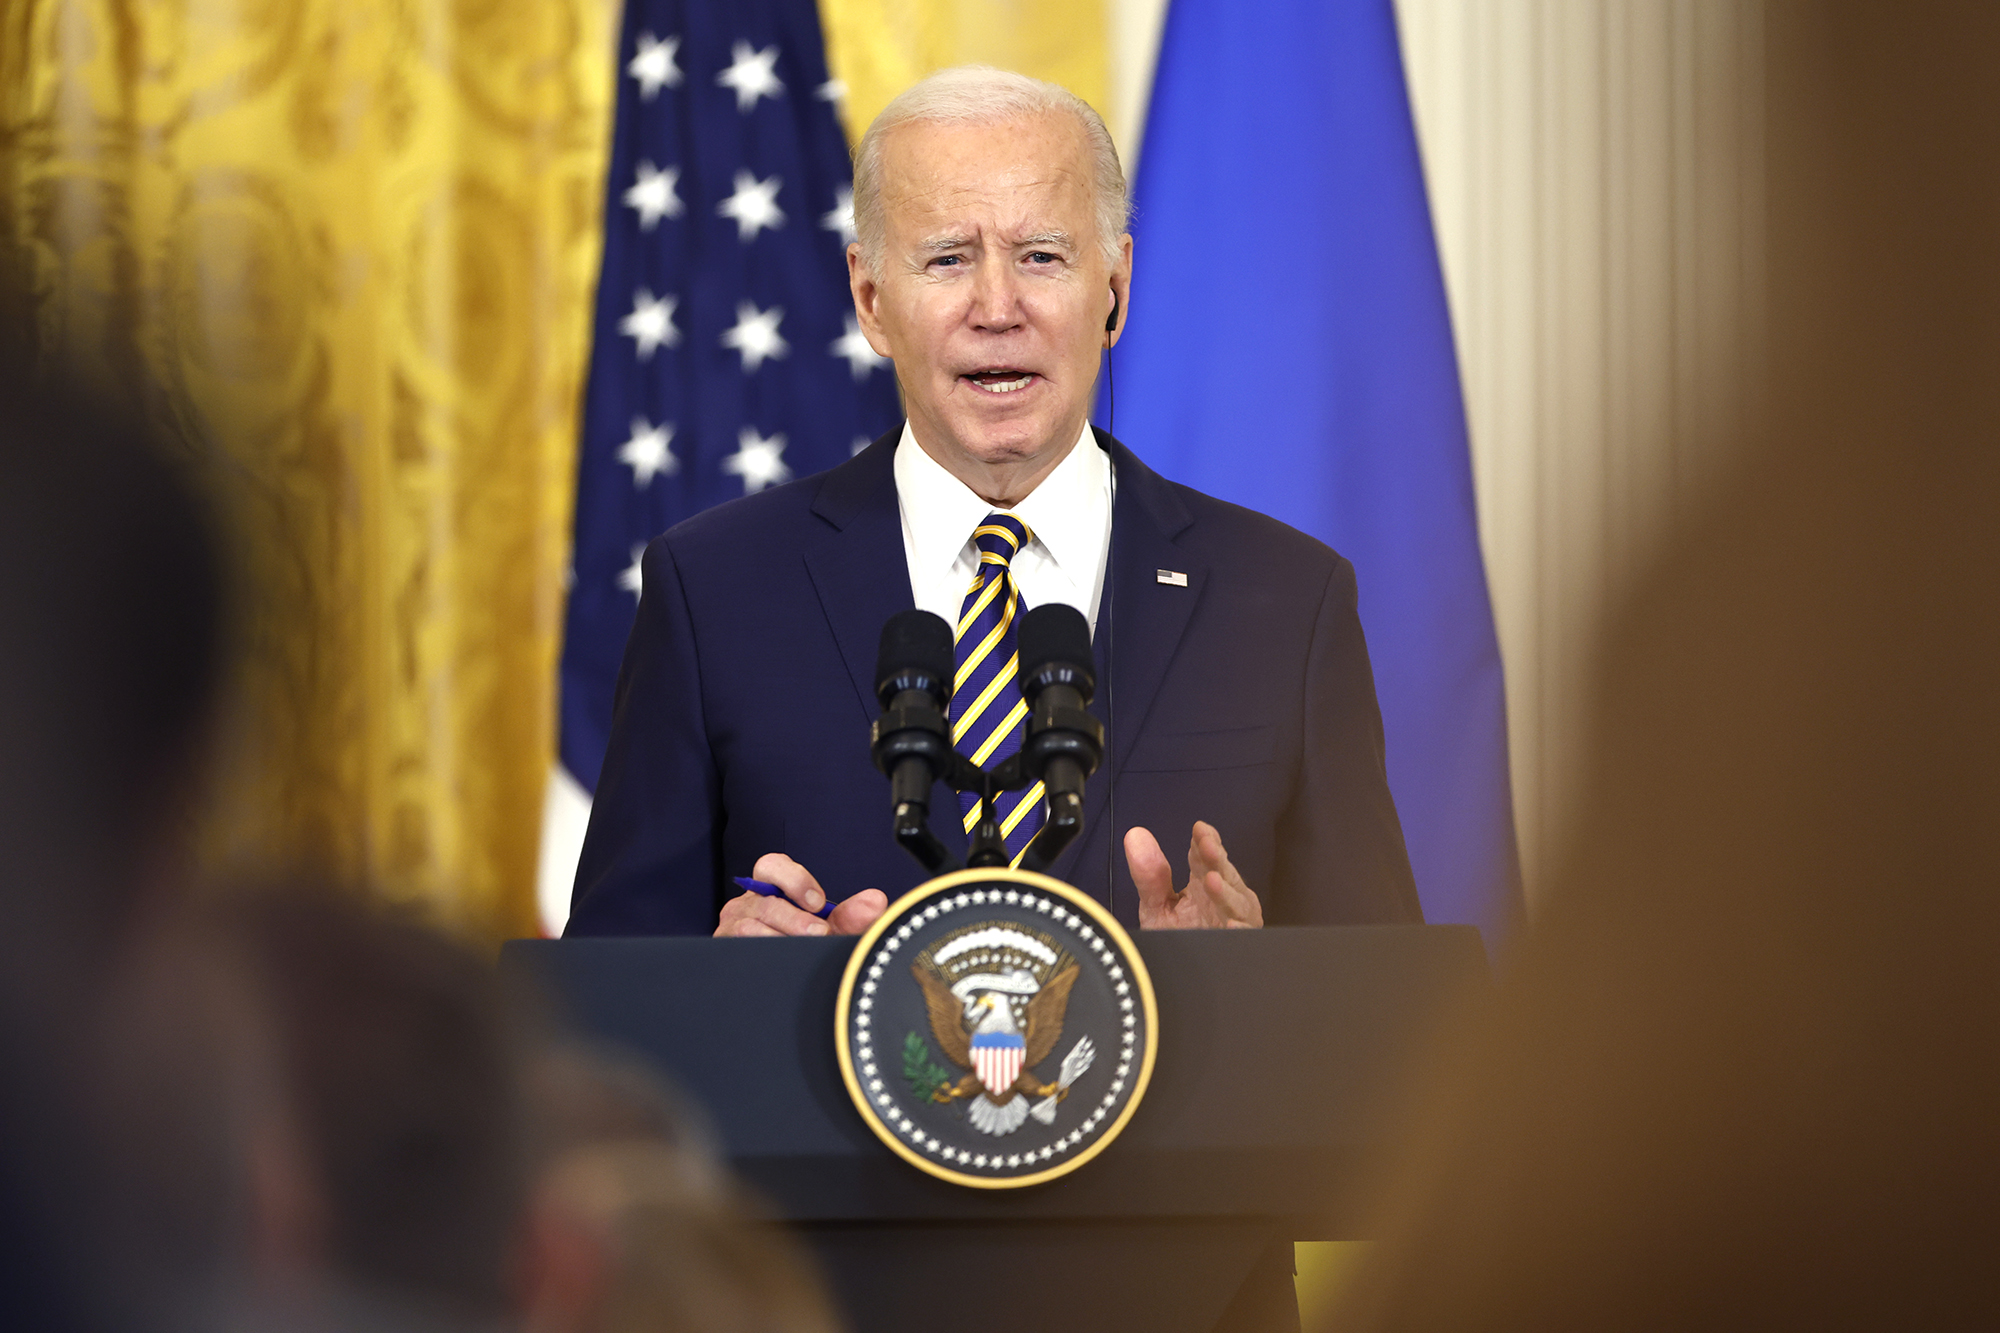 US President Joe Biden speaks during a news conference with Volodymyr Zelensky, in the East Room of the White House in Washington D.C., on December 21.